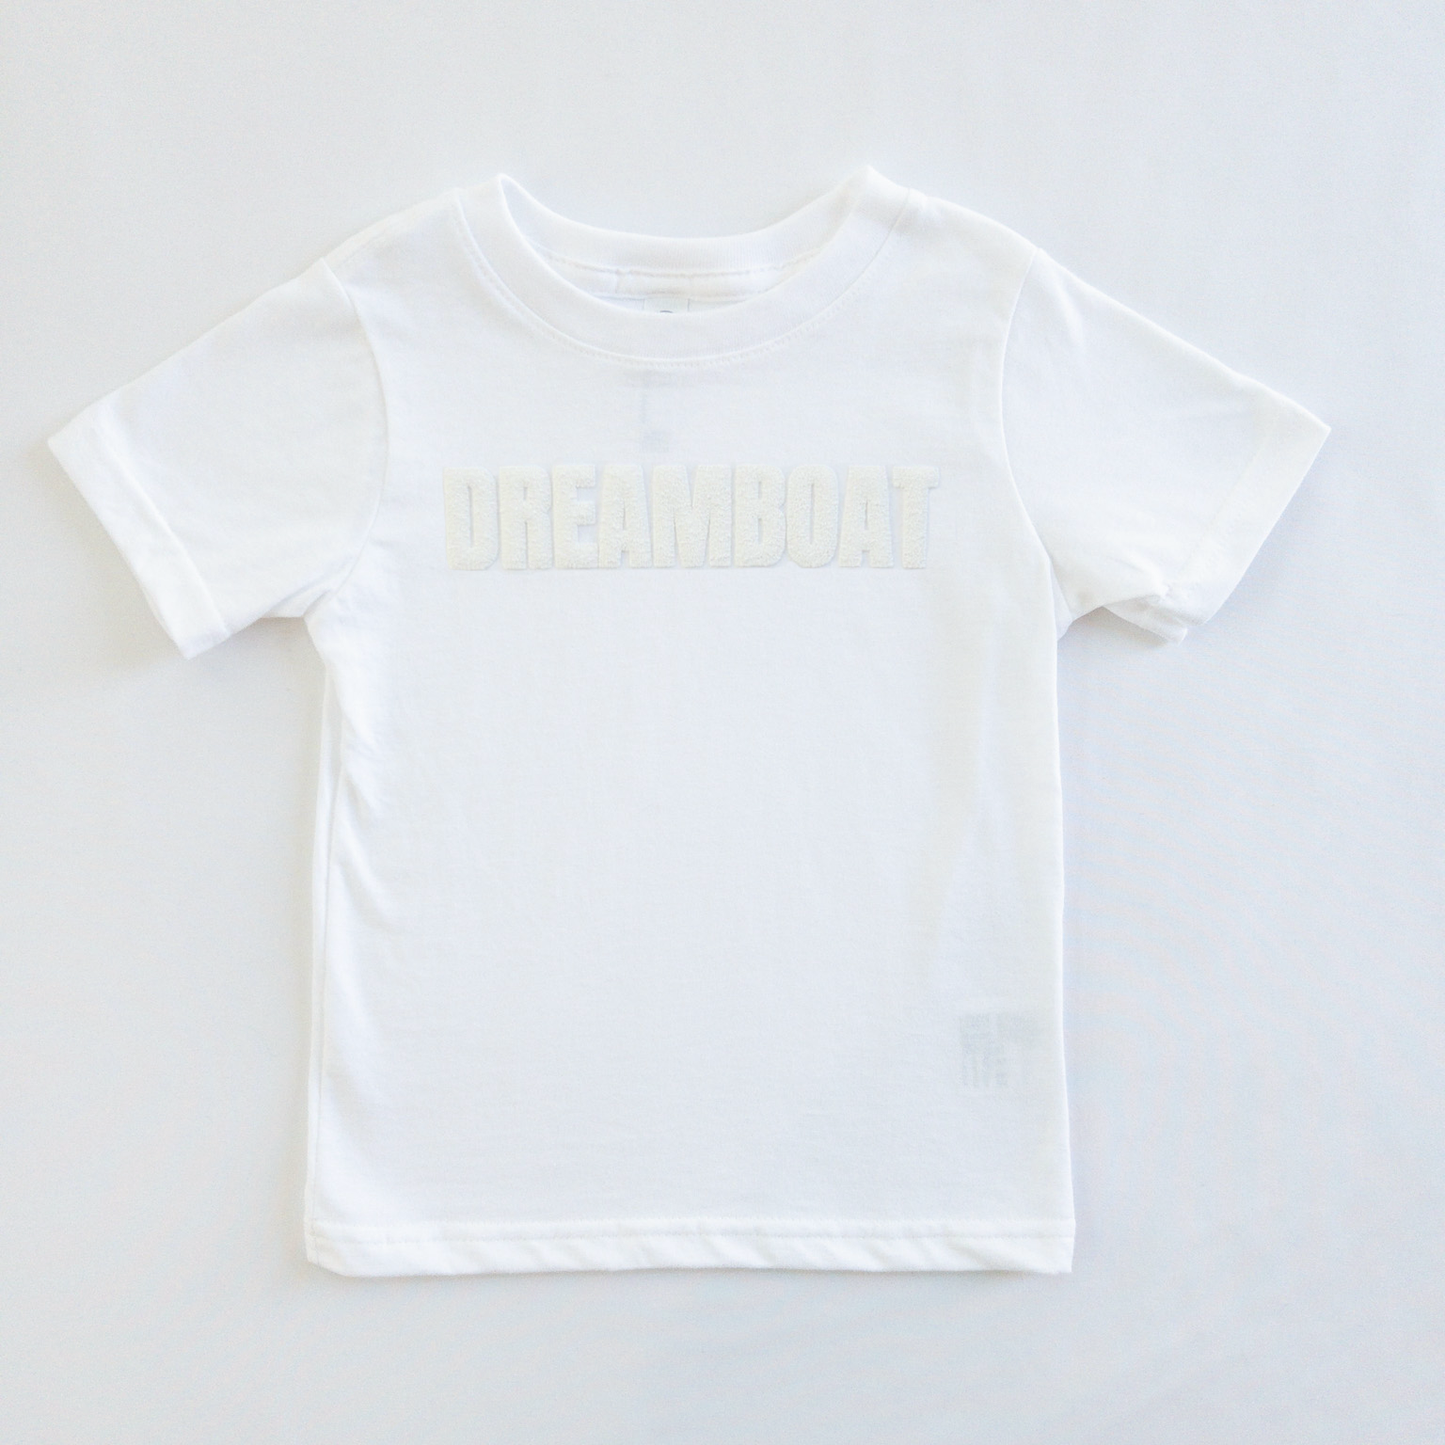 Dreamboat White on White Puff Letters Toddler T-Shirt or Baby Bodysuit